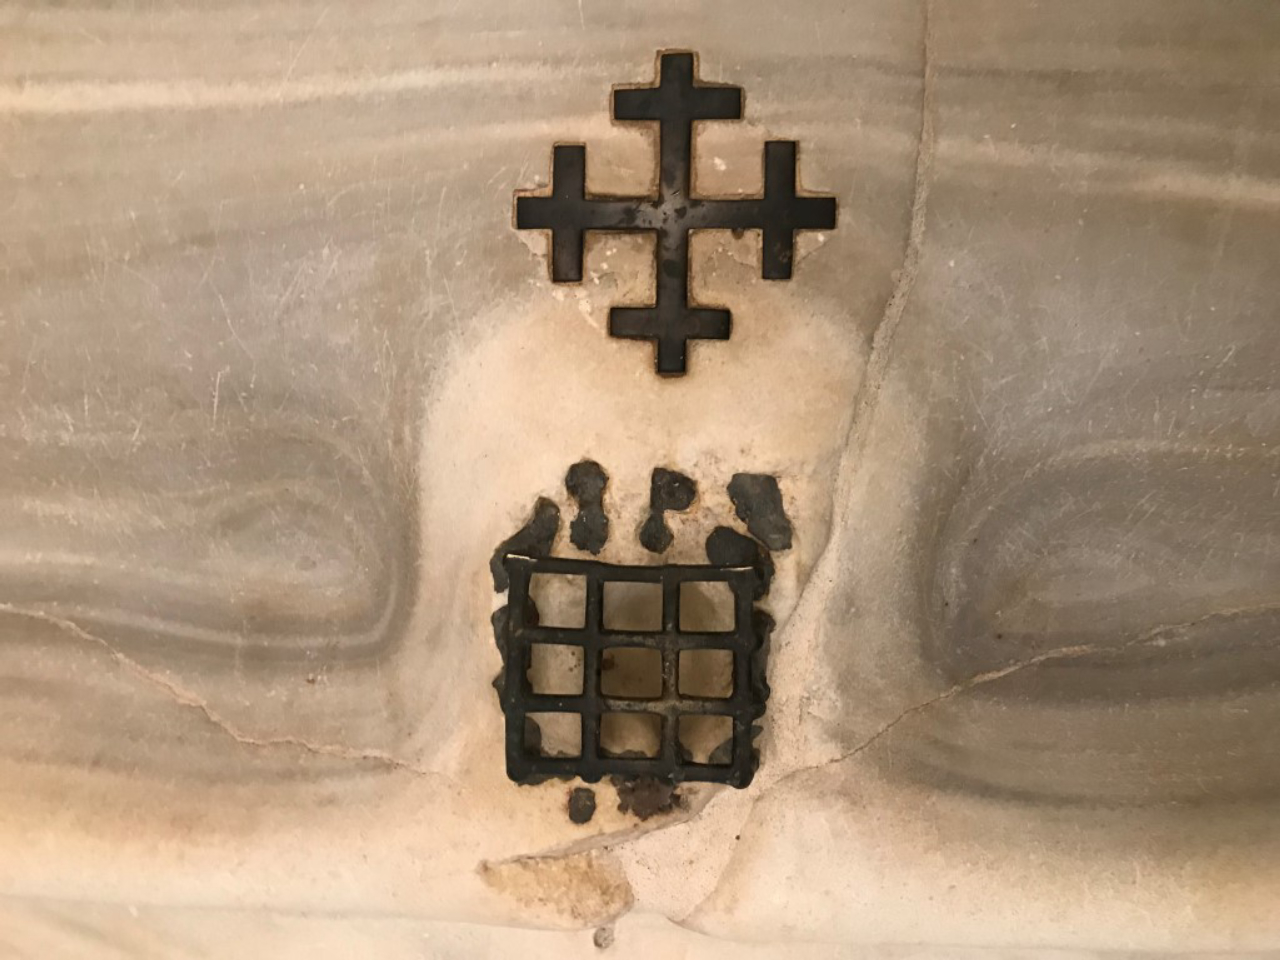 A medieval cross and grate set into the marble staircase which Catholic tradition holds Jesus climbed at his judgment before the Roman prefect Pontius Pilate, in Rome, April 8, 2019. The steps, now in a sanctuary across from the Basilica of St. John Lateran, were purportedly brought to Rome in 326 A.D.; the grate covers a spot said to be stained by a drop of Christ's blood. (Elisabetta Povoledo/The New York Times)